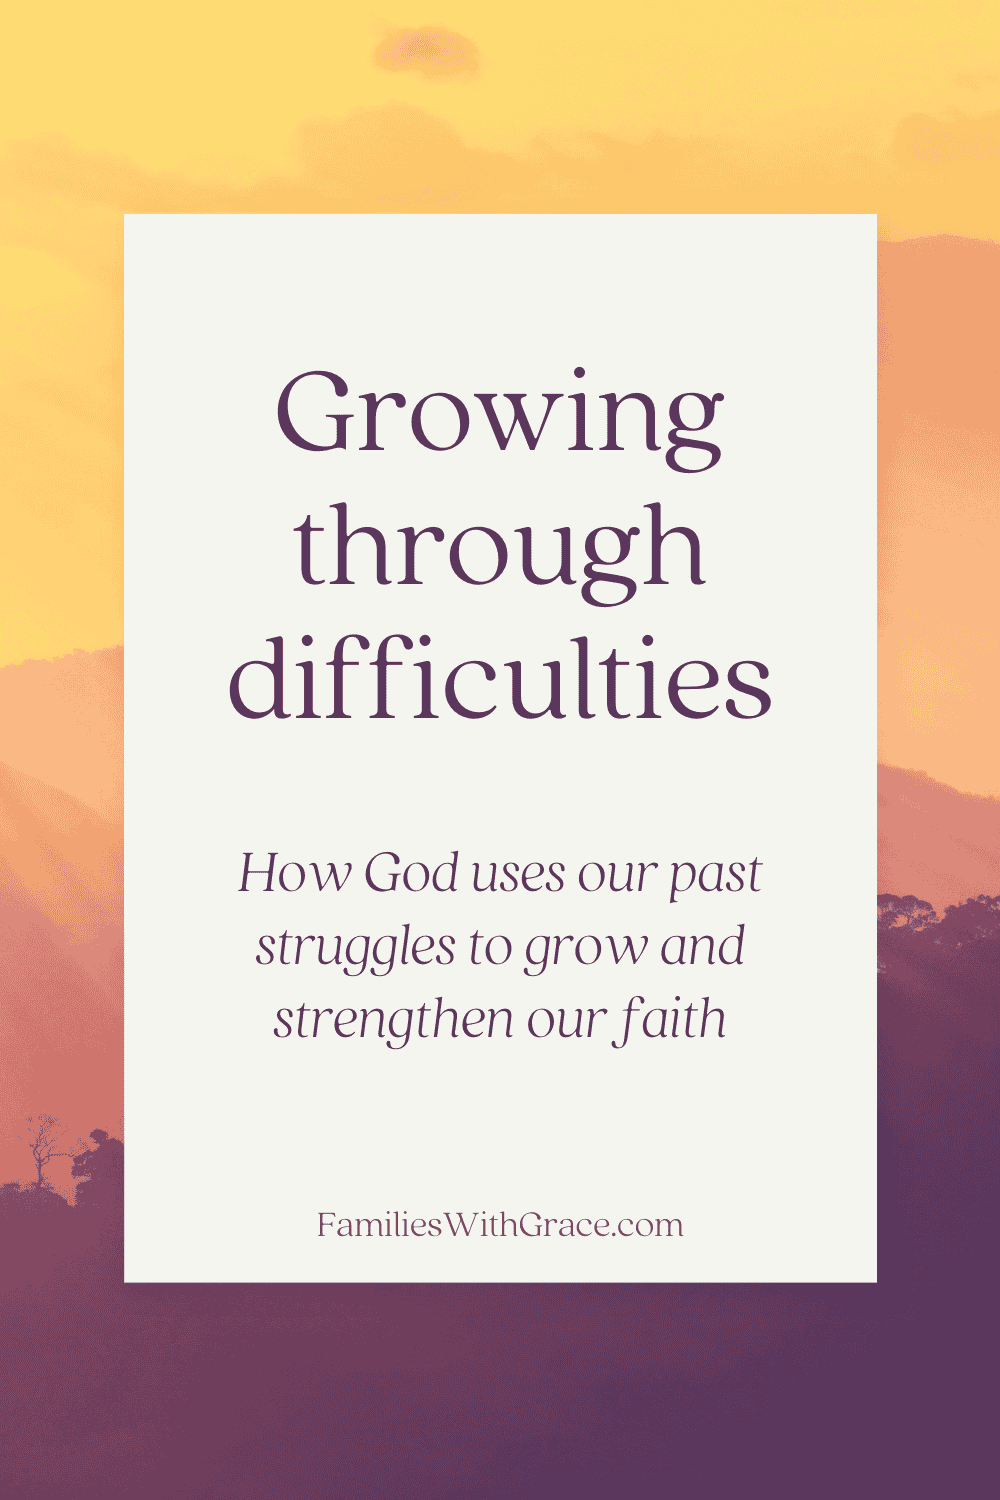 Growing through difficulties